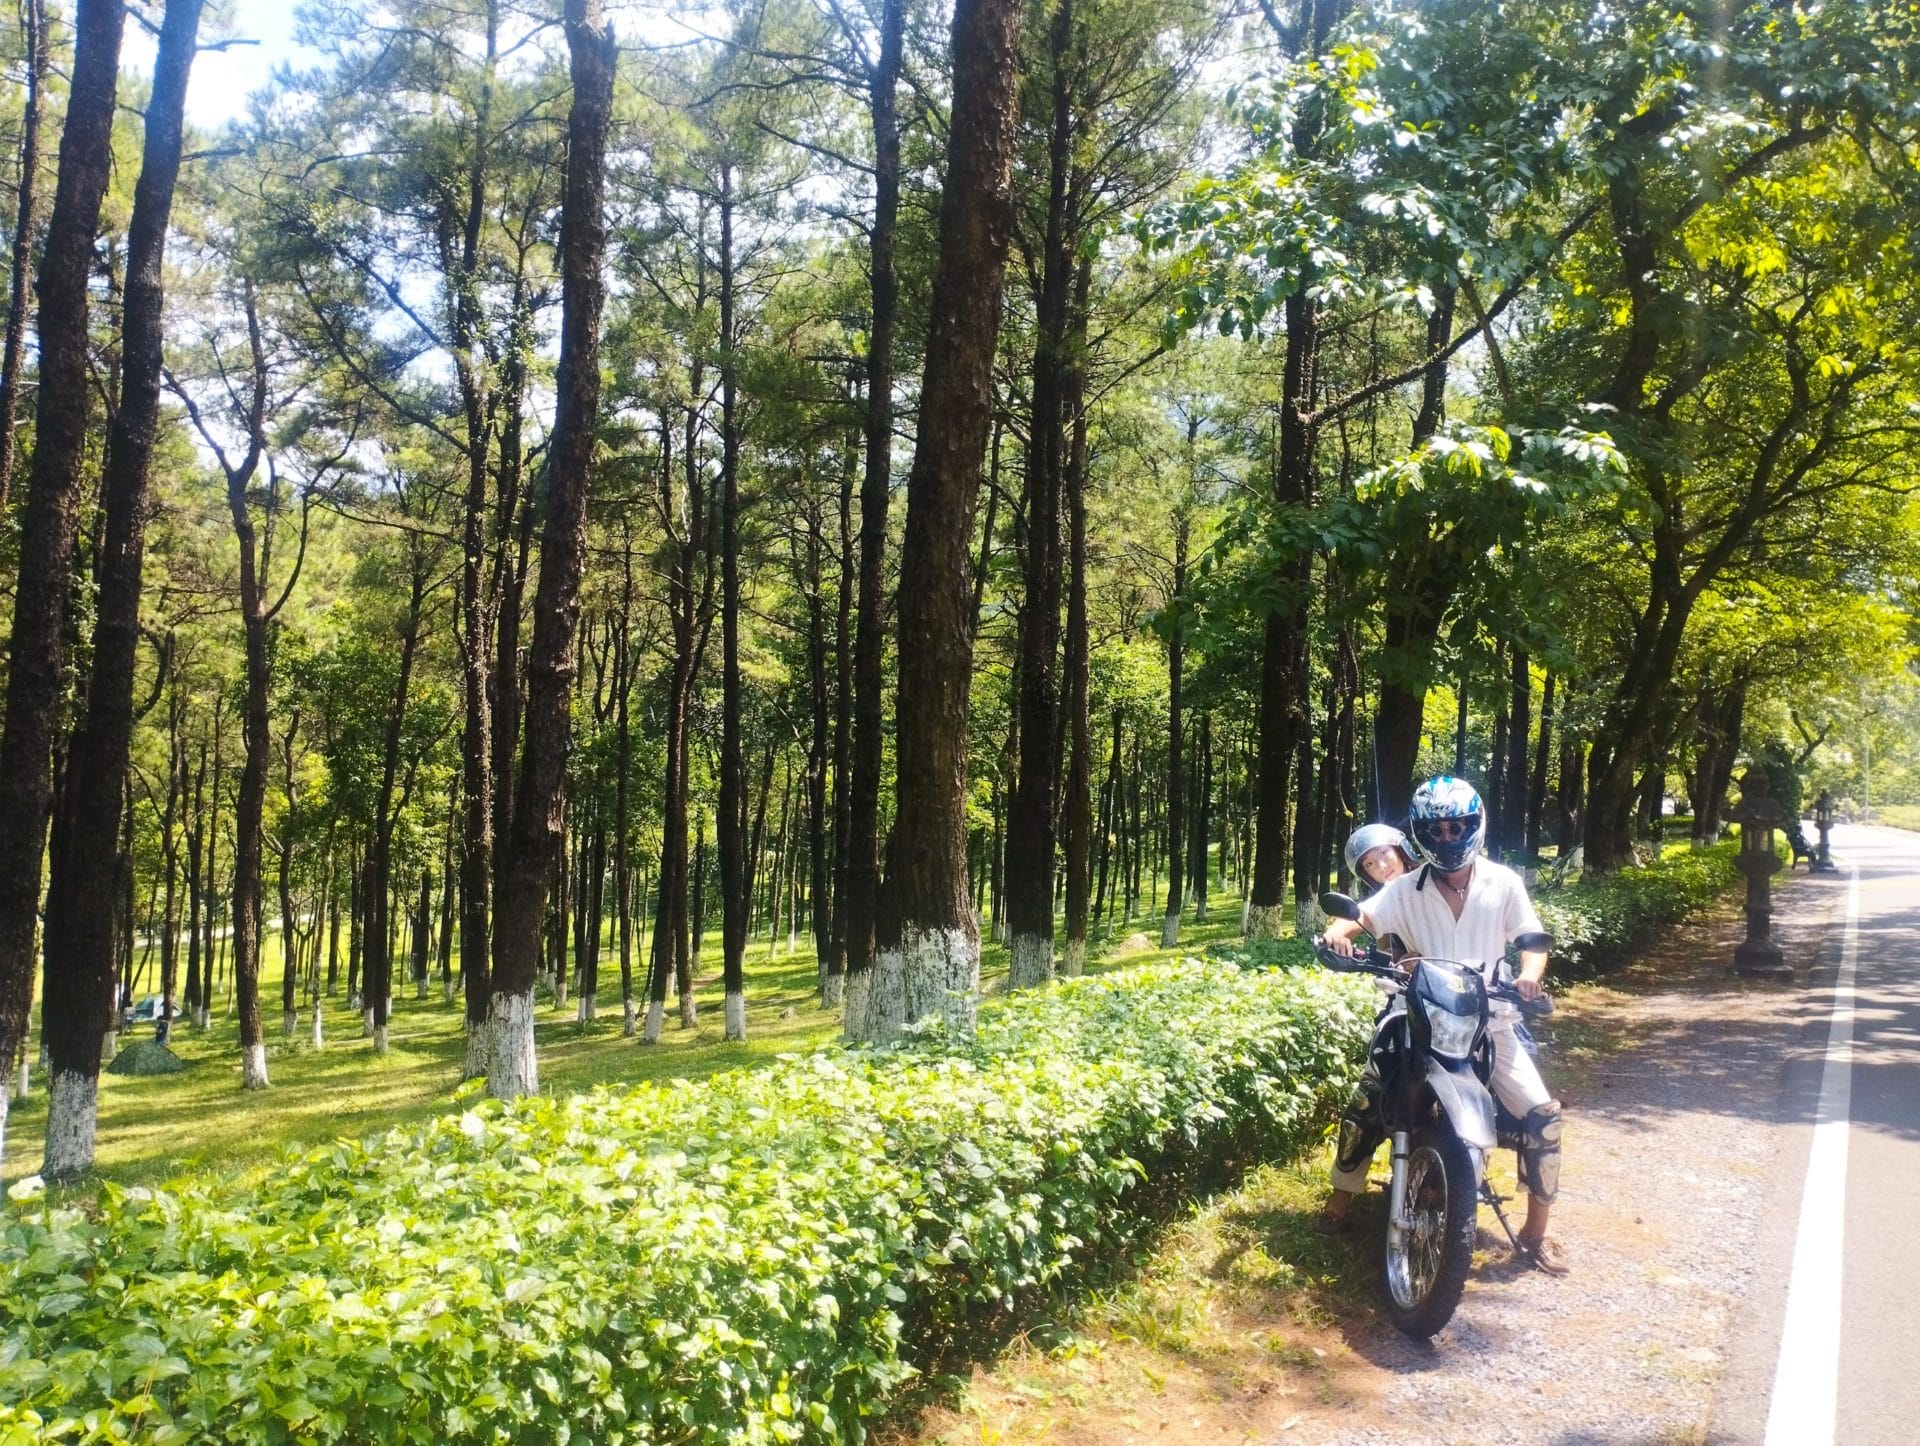 FULL DAY HANOI MOTORBIKE TOUR TO BA VI MOUNTAIN AND DUONG LAM ANCIENT VILLAGE